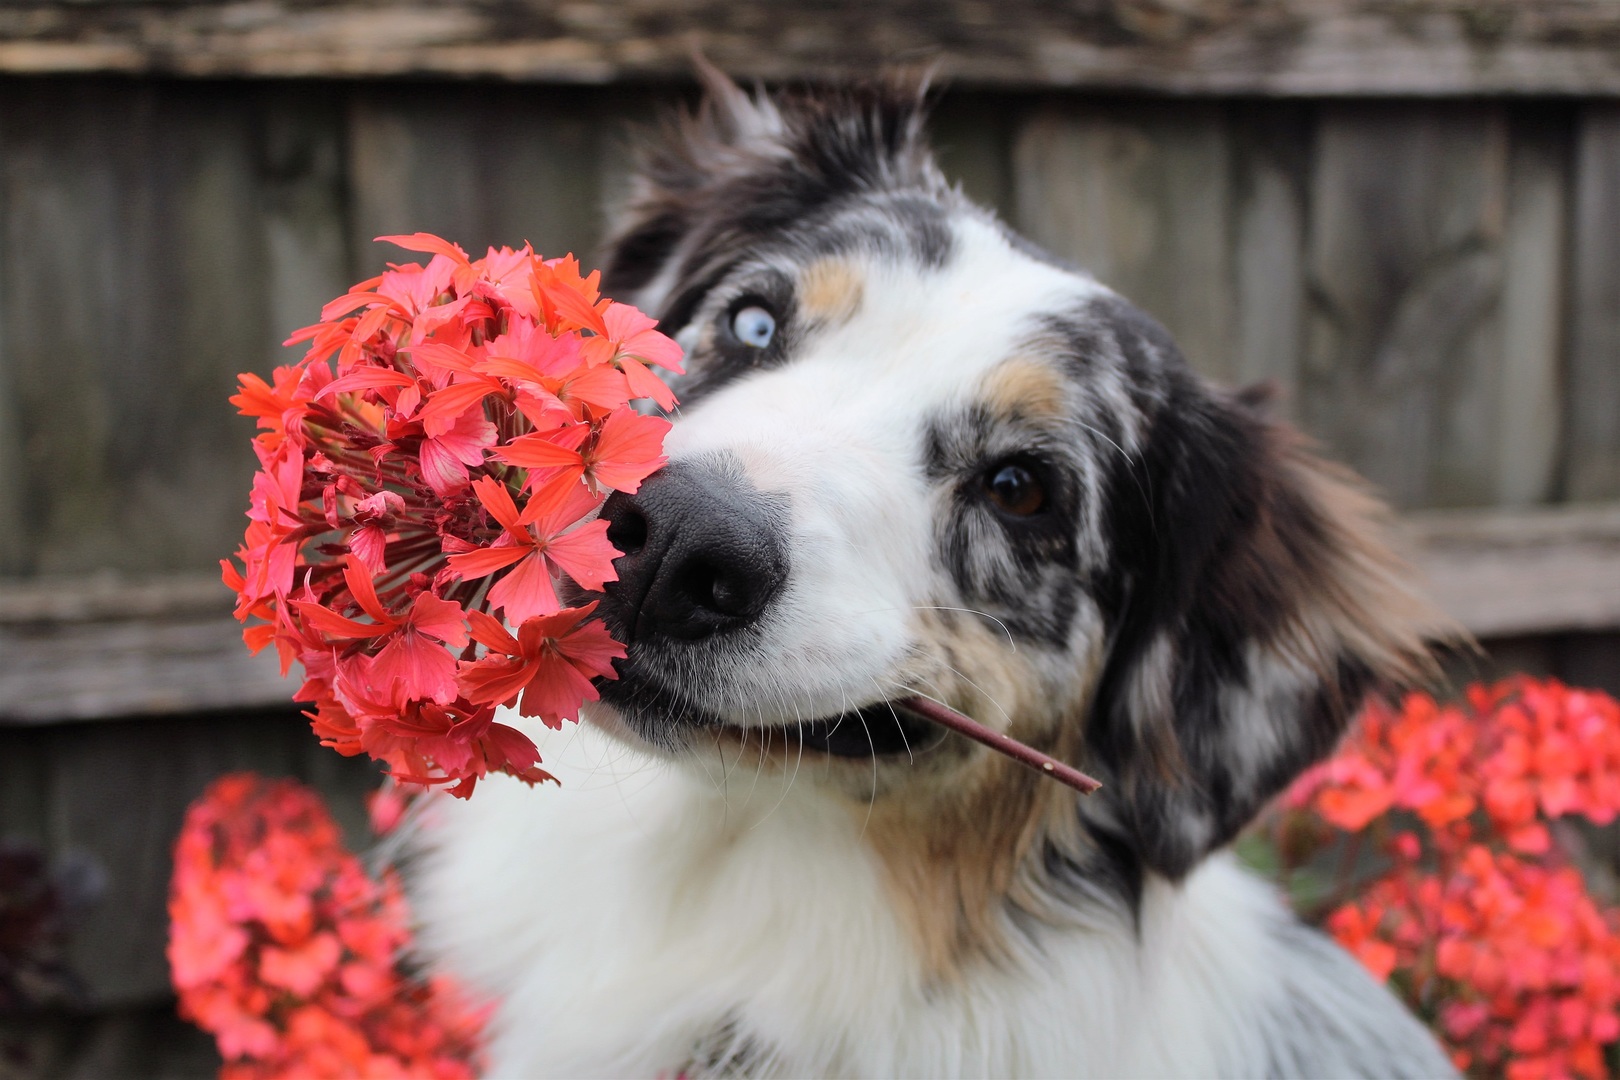 12 Household plants dog owners should avoid